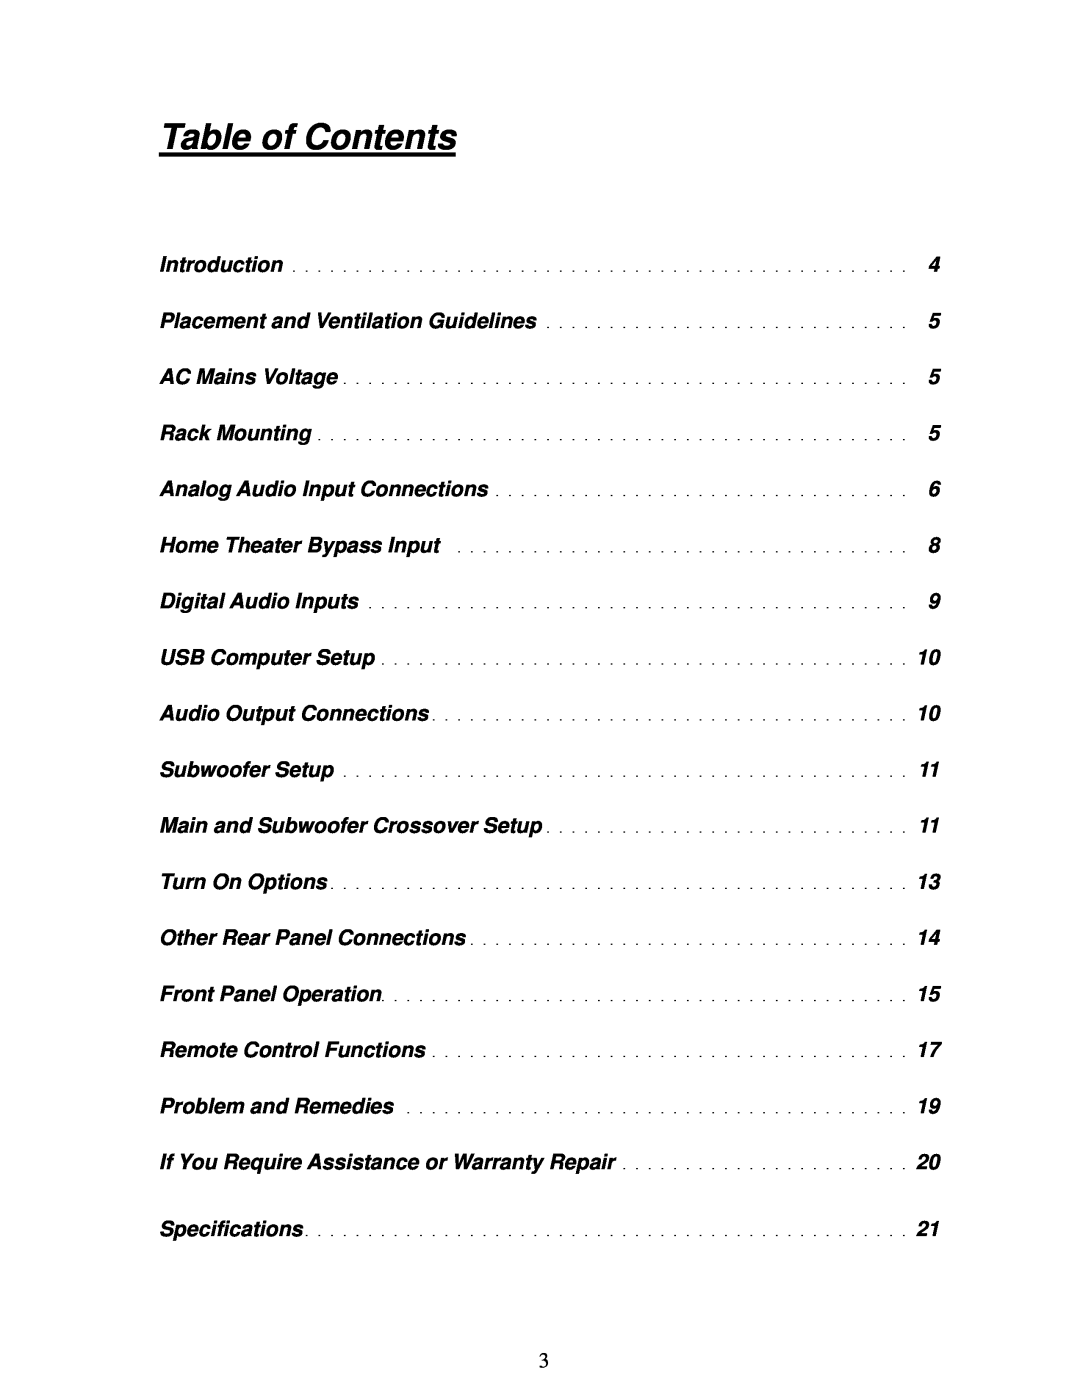 Parasound P 5 manual Table of Contents 